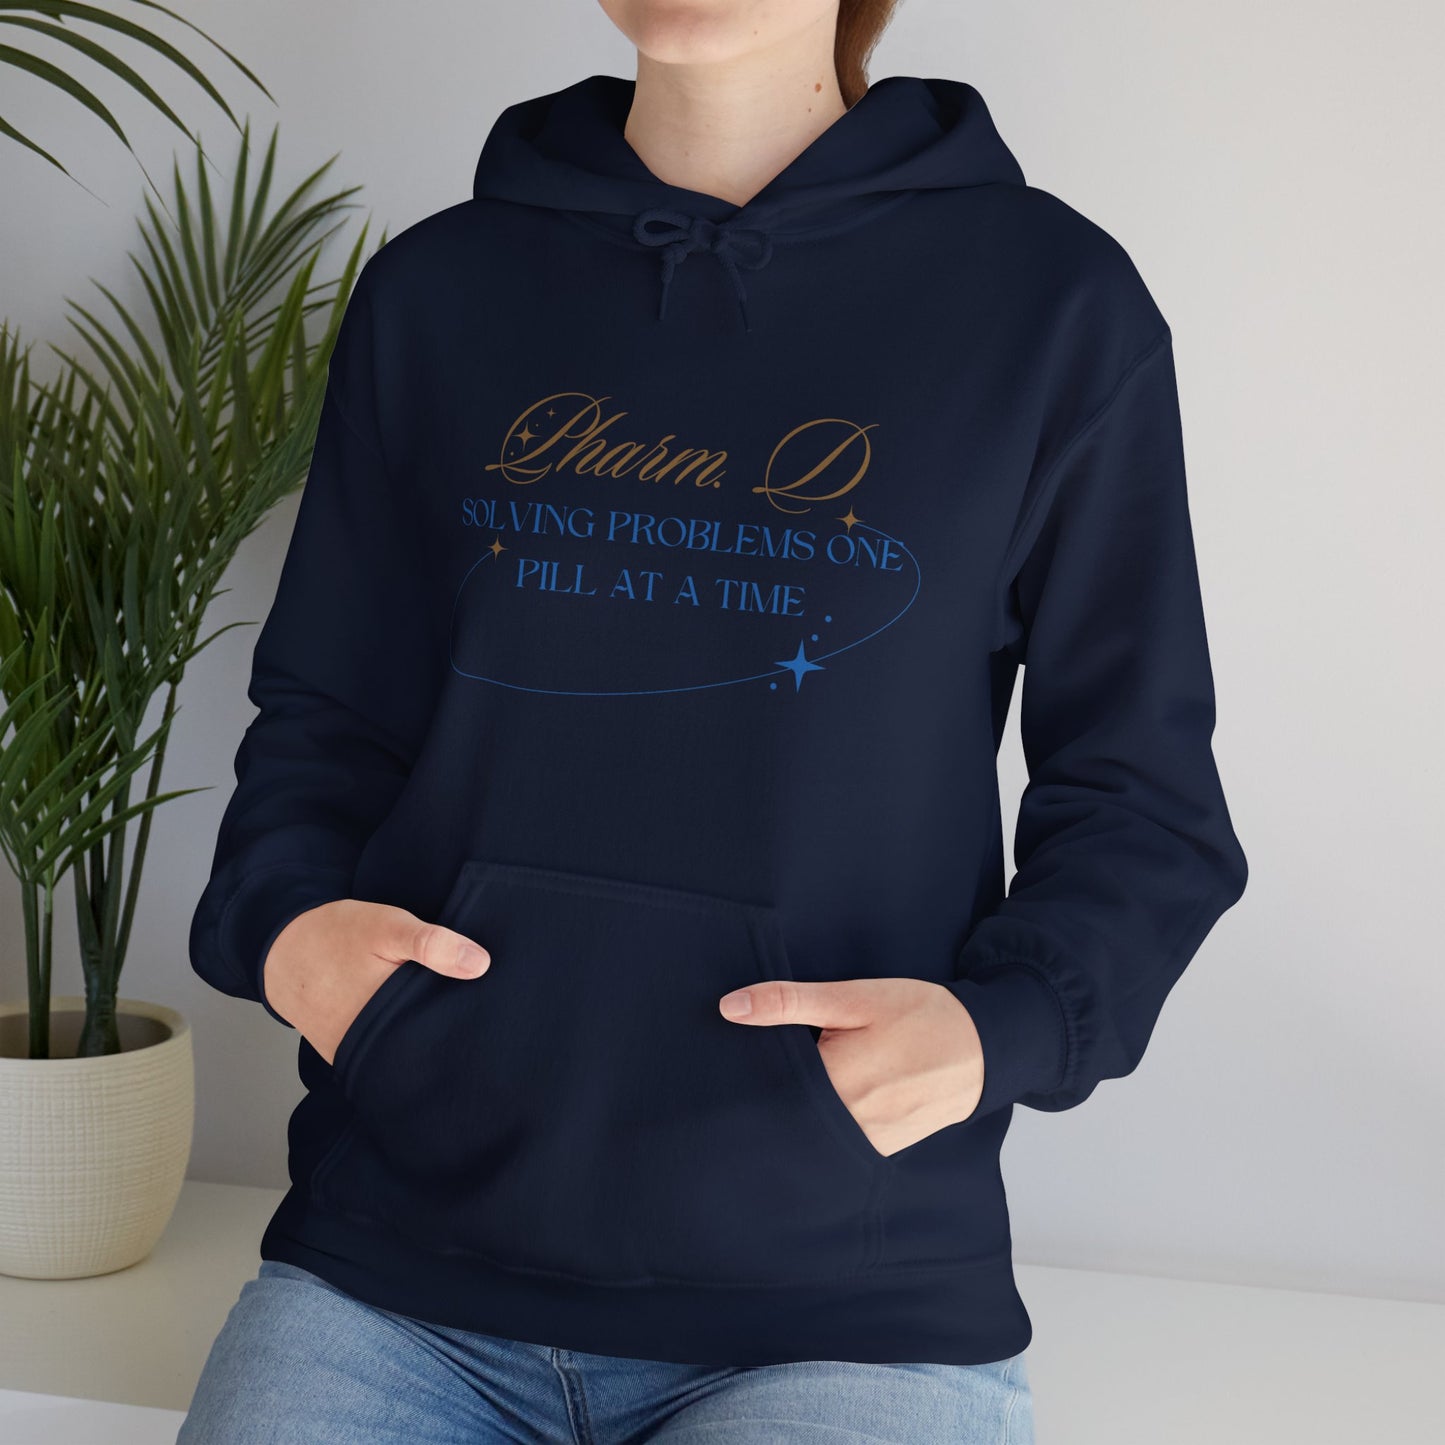 Pharm.D.- Hoodies with Doctor of Pharmacy Credentials